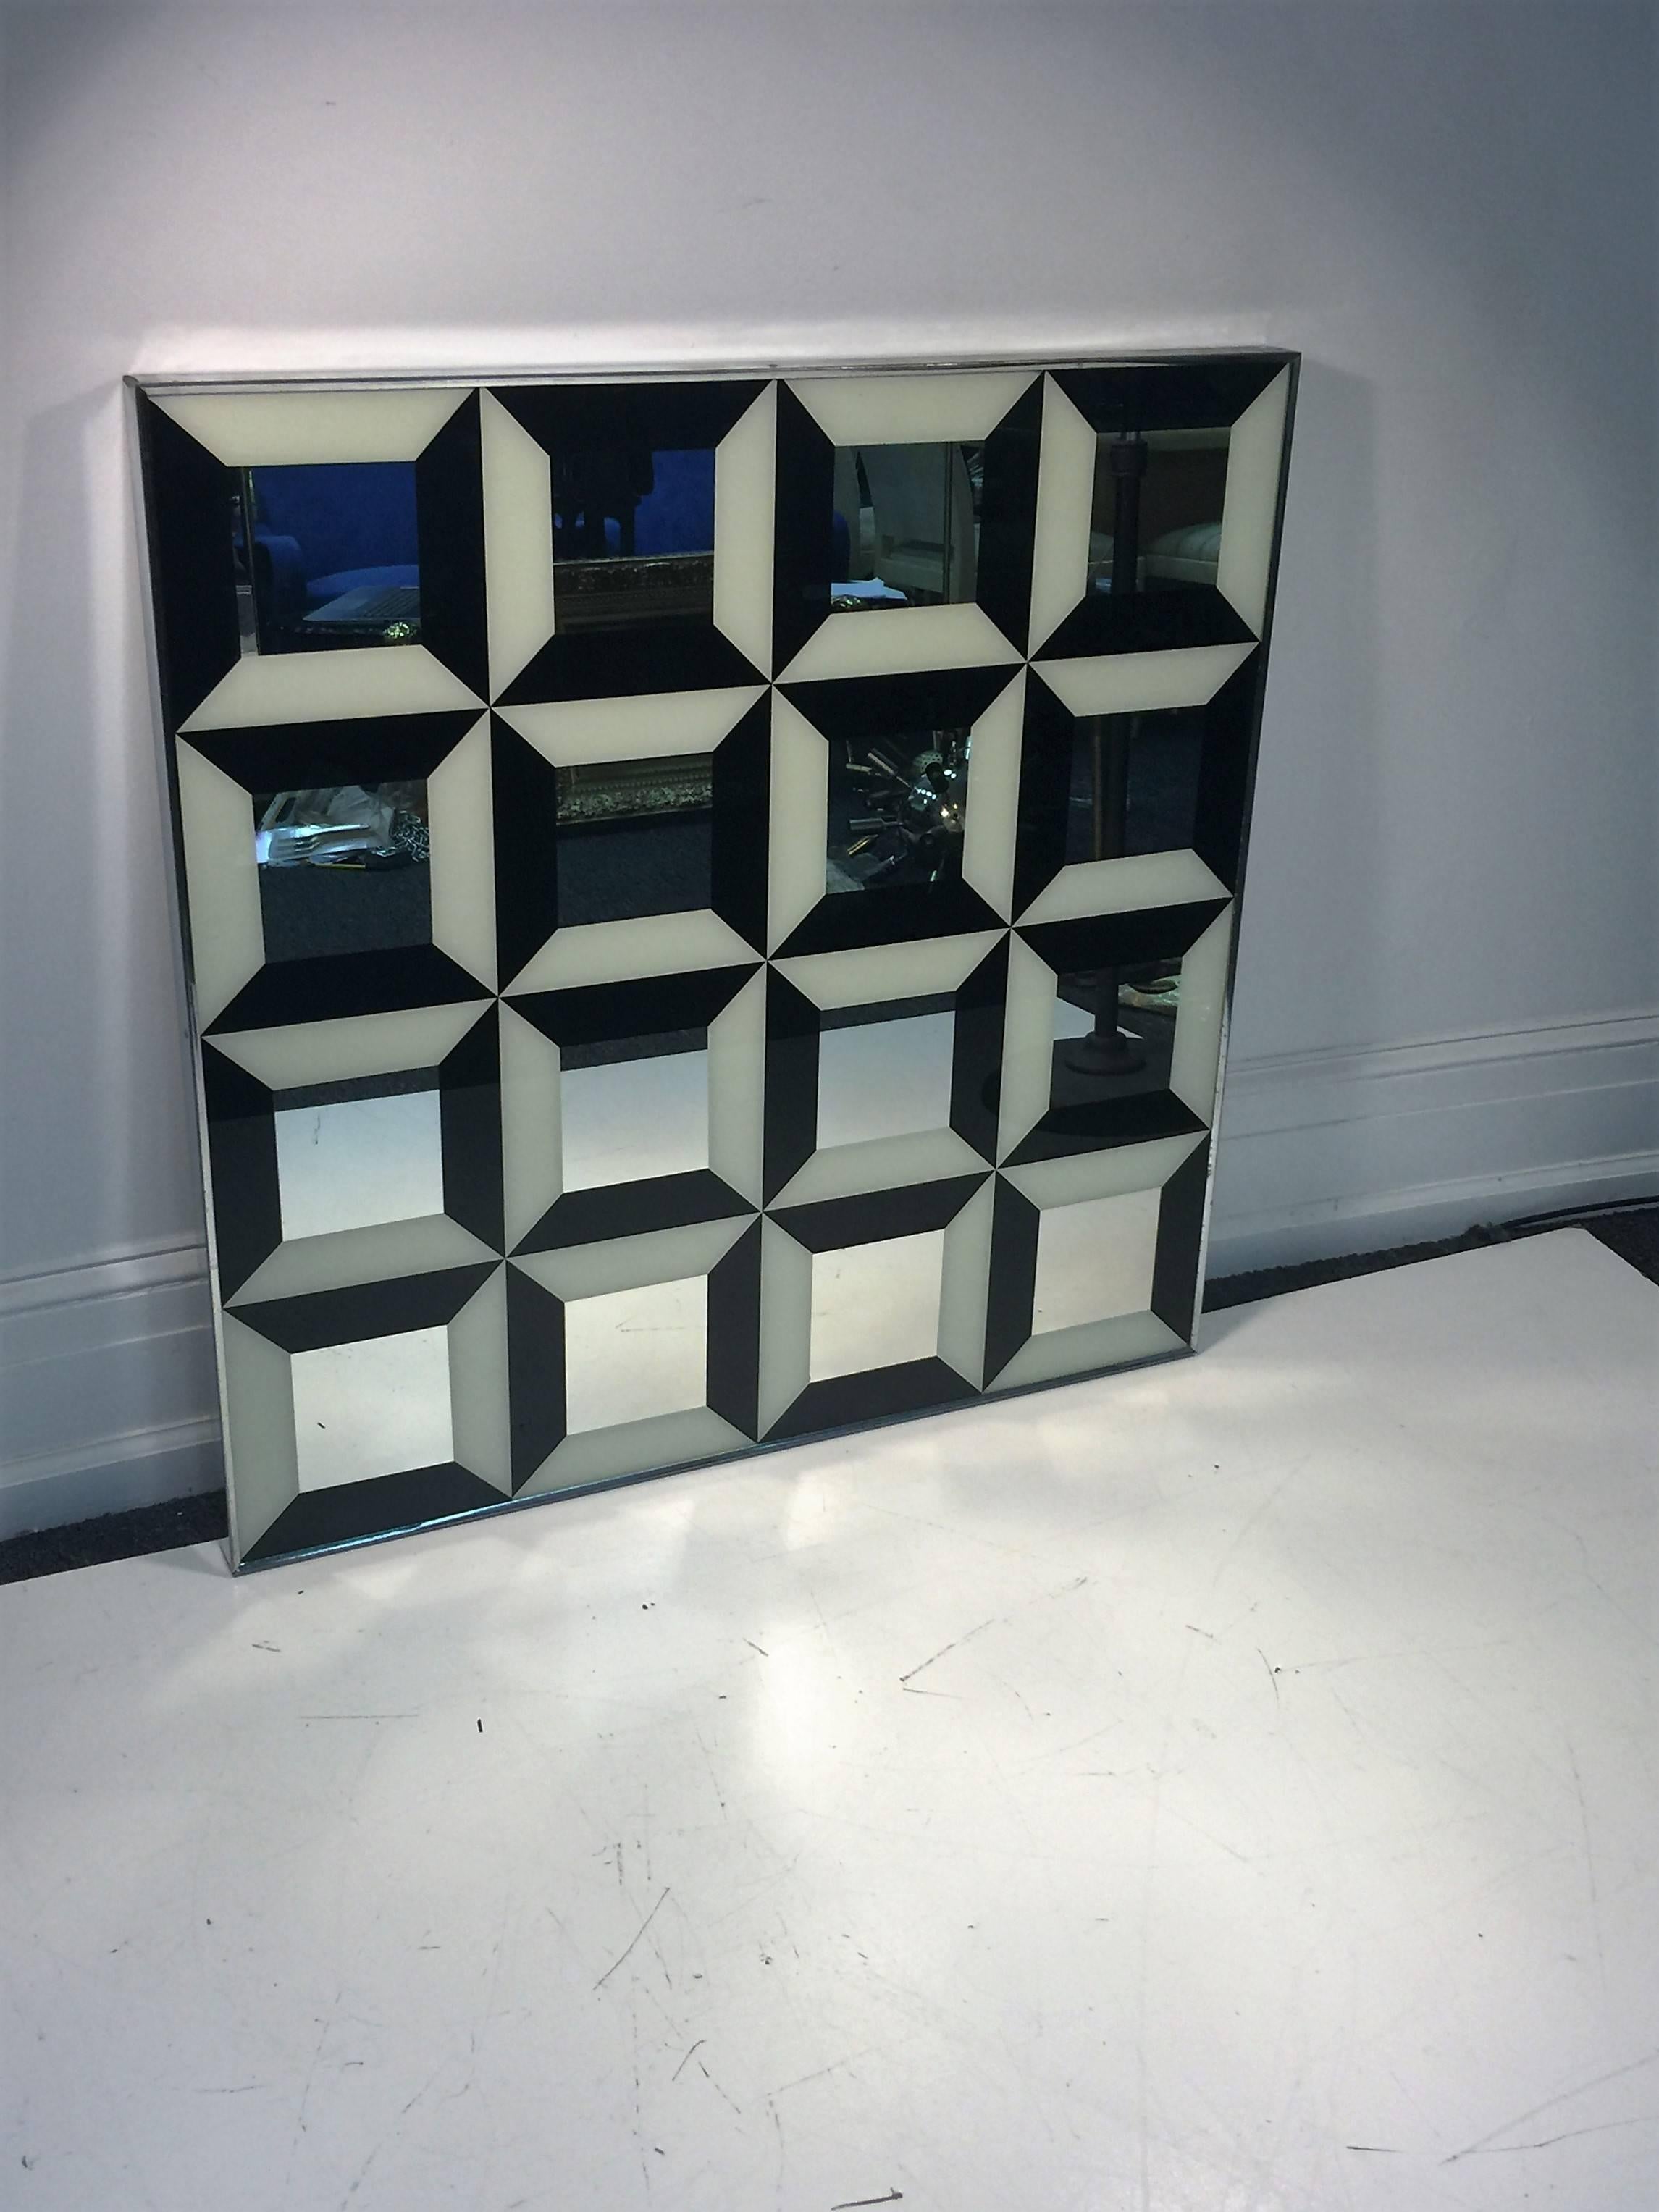 Great Pop Art reverse painted 1970s mirror designed by Verner Panton.
Substantial square mirror that would add drama and depth to any wall in a modern interior.